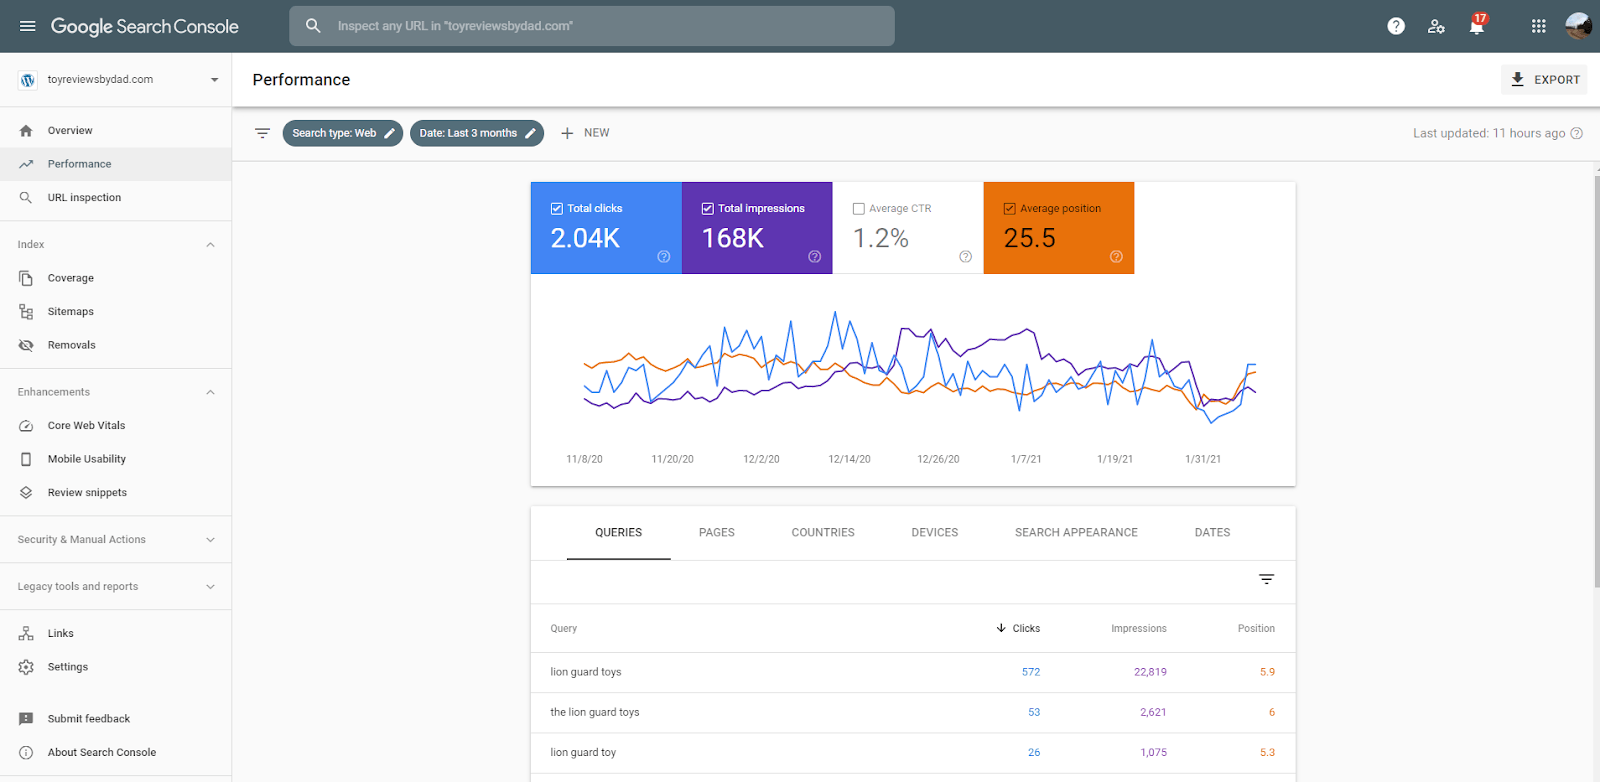 The overview page of Google Search Console.